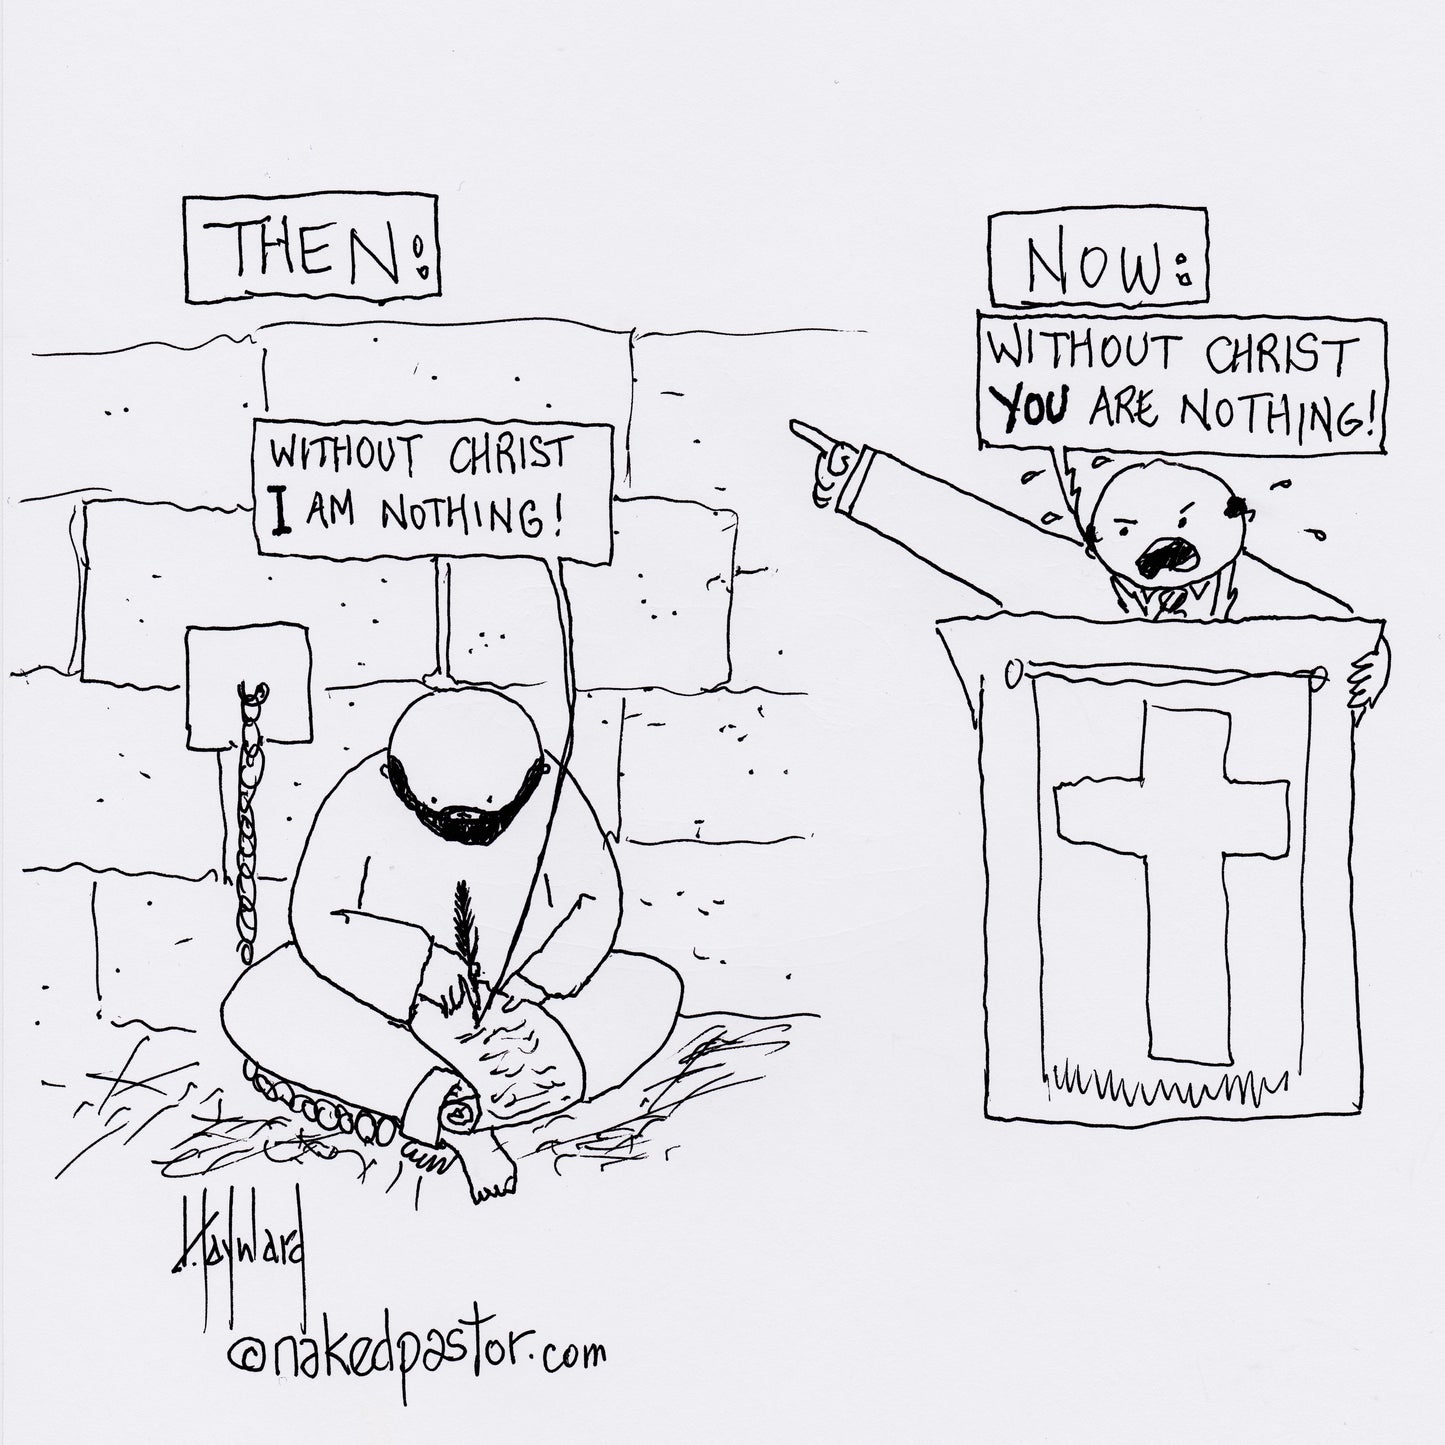 Without Christ Then and Now Digital Cartoon